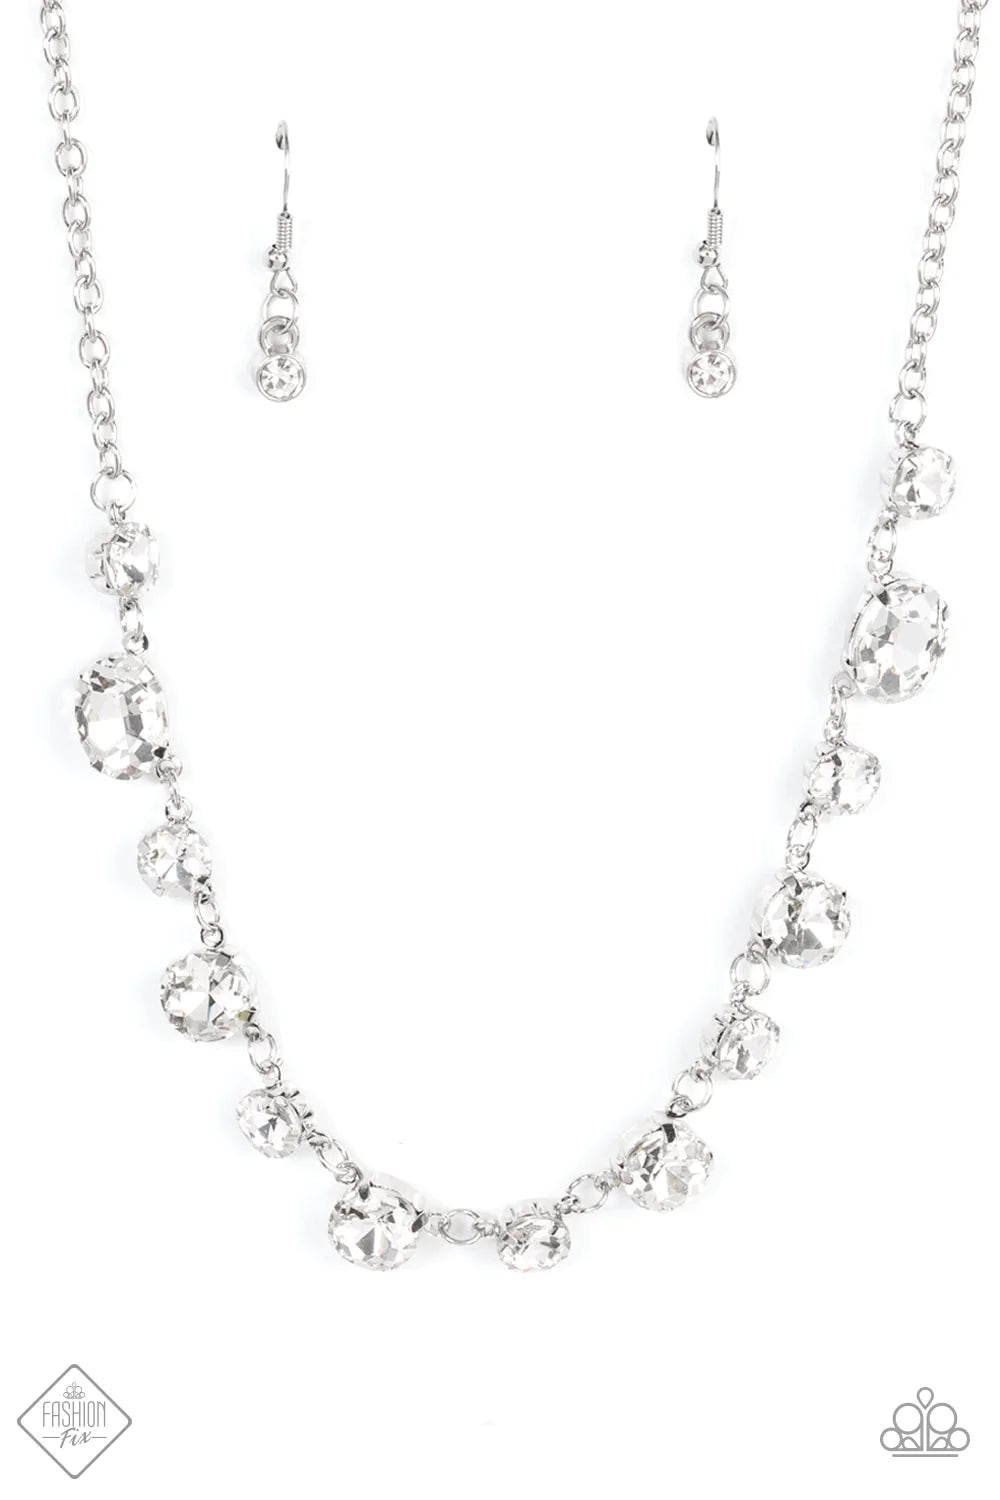 Paparazzi Necklace ~ Hands Off the Crown! - White